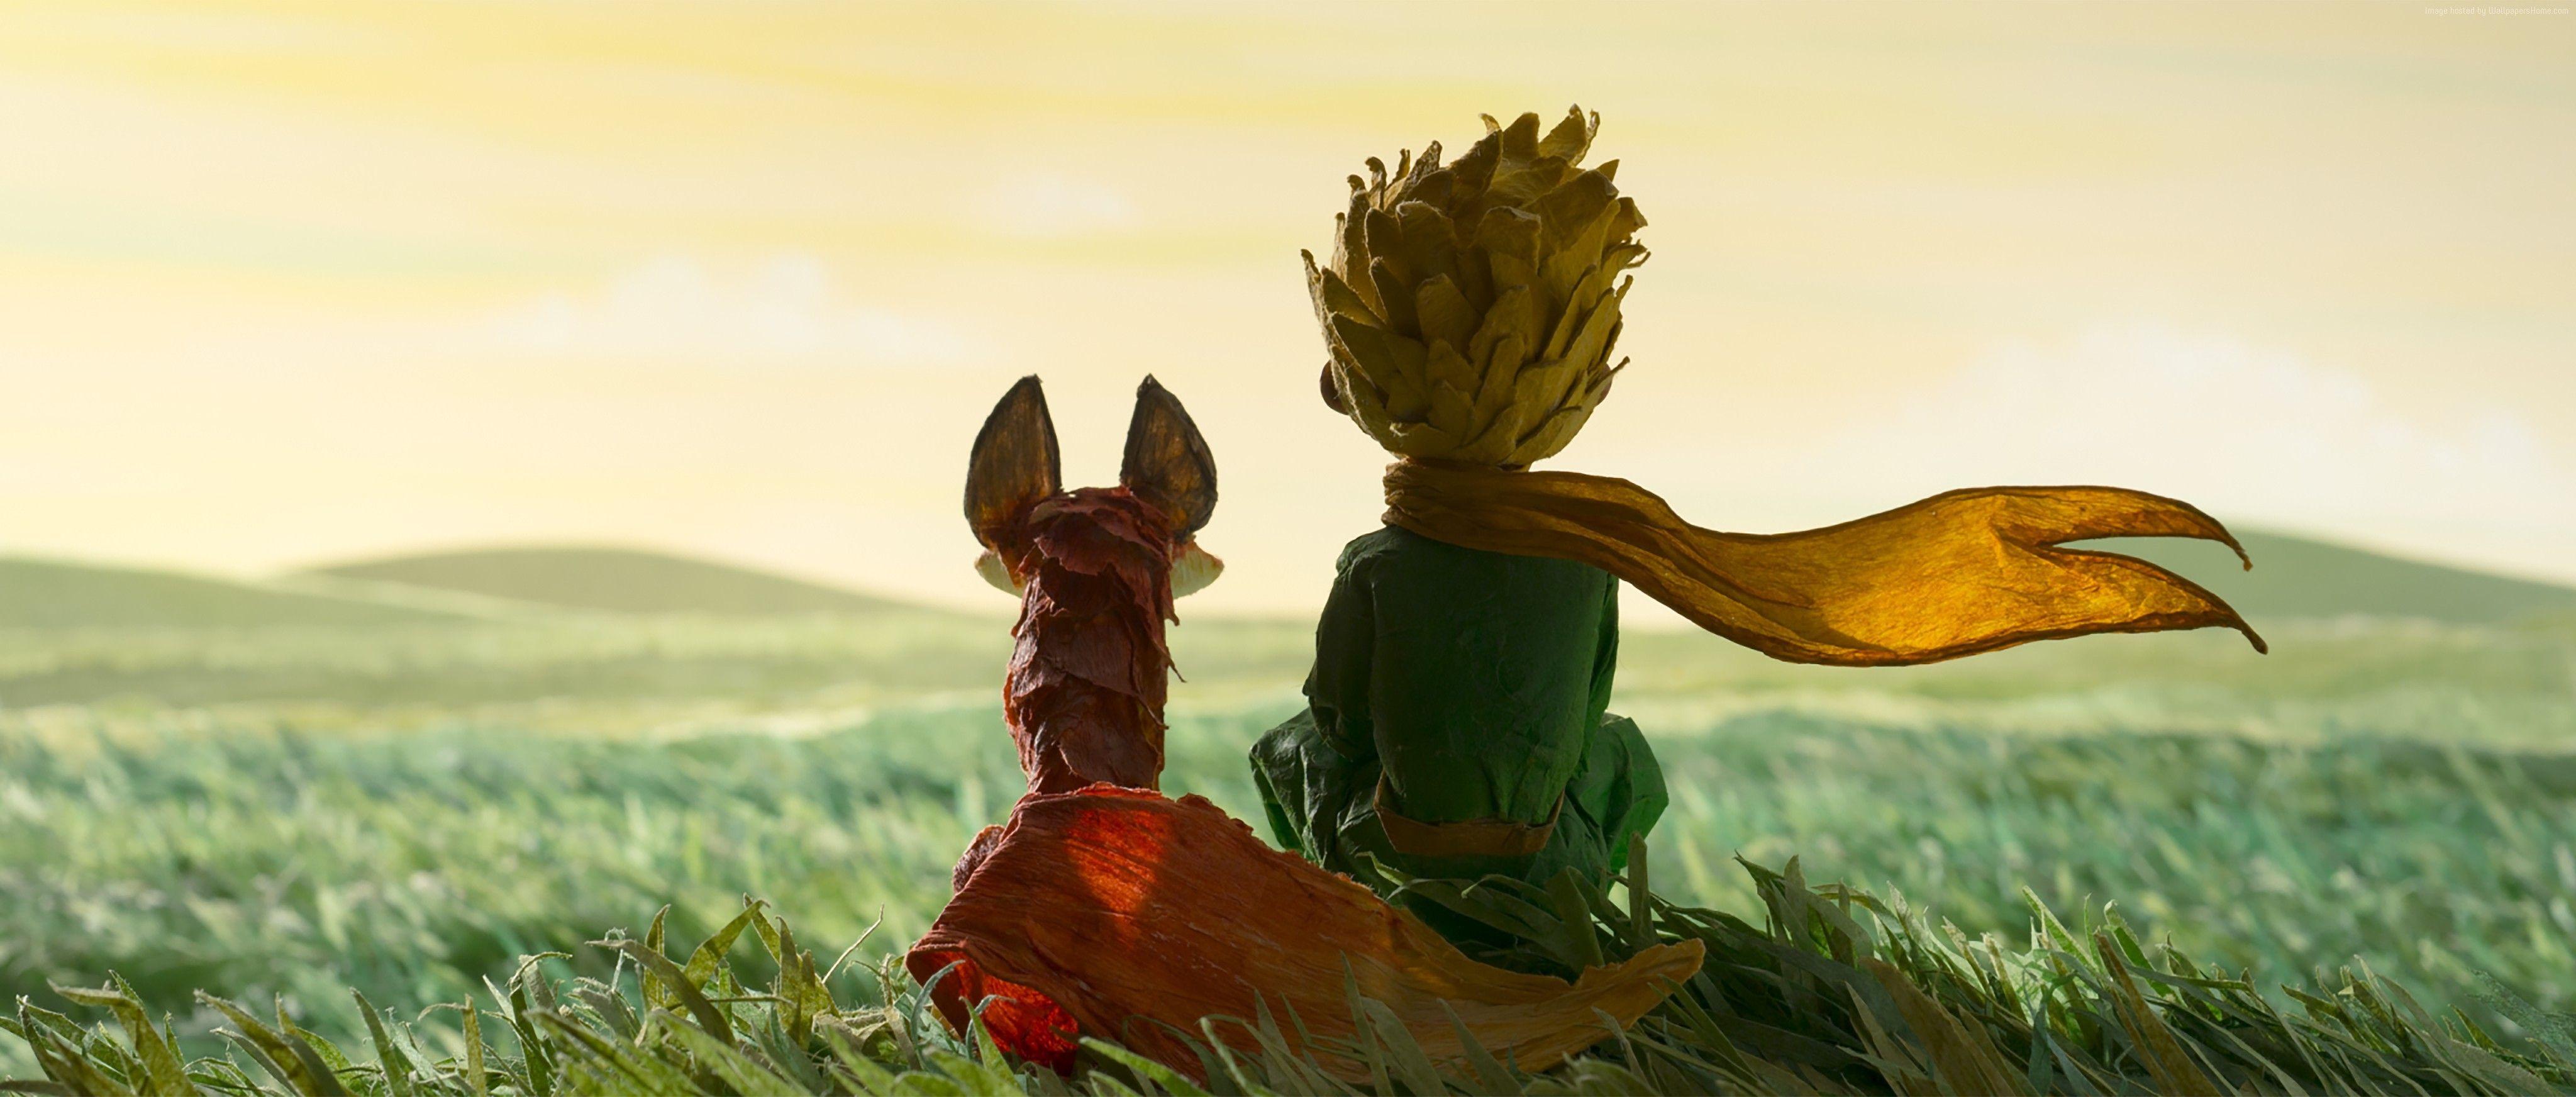 Wallpaper The Little Prince, The Fox, Movies